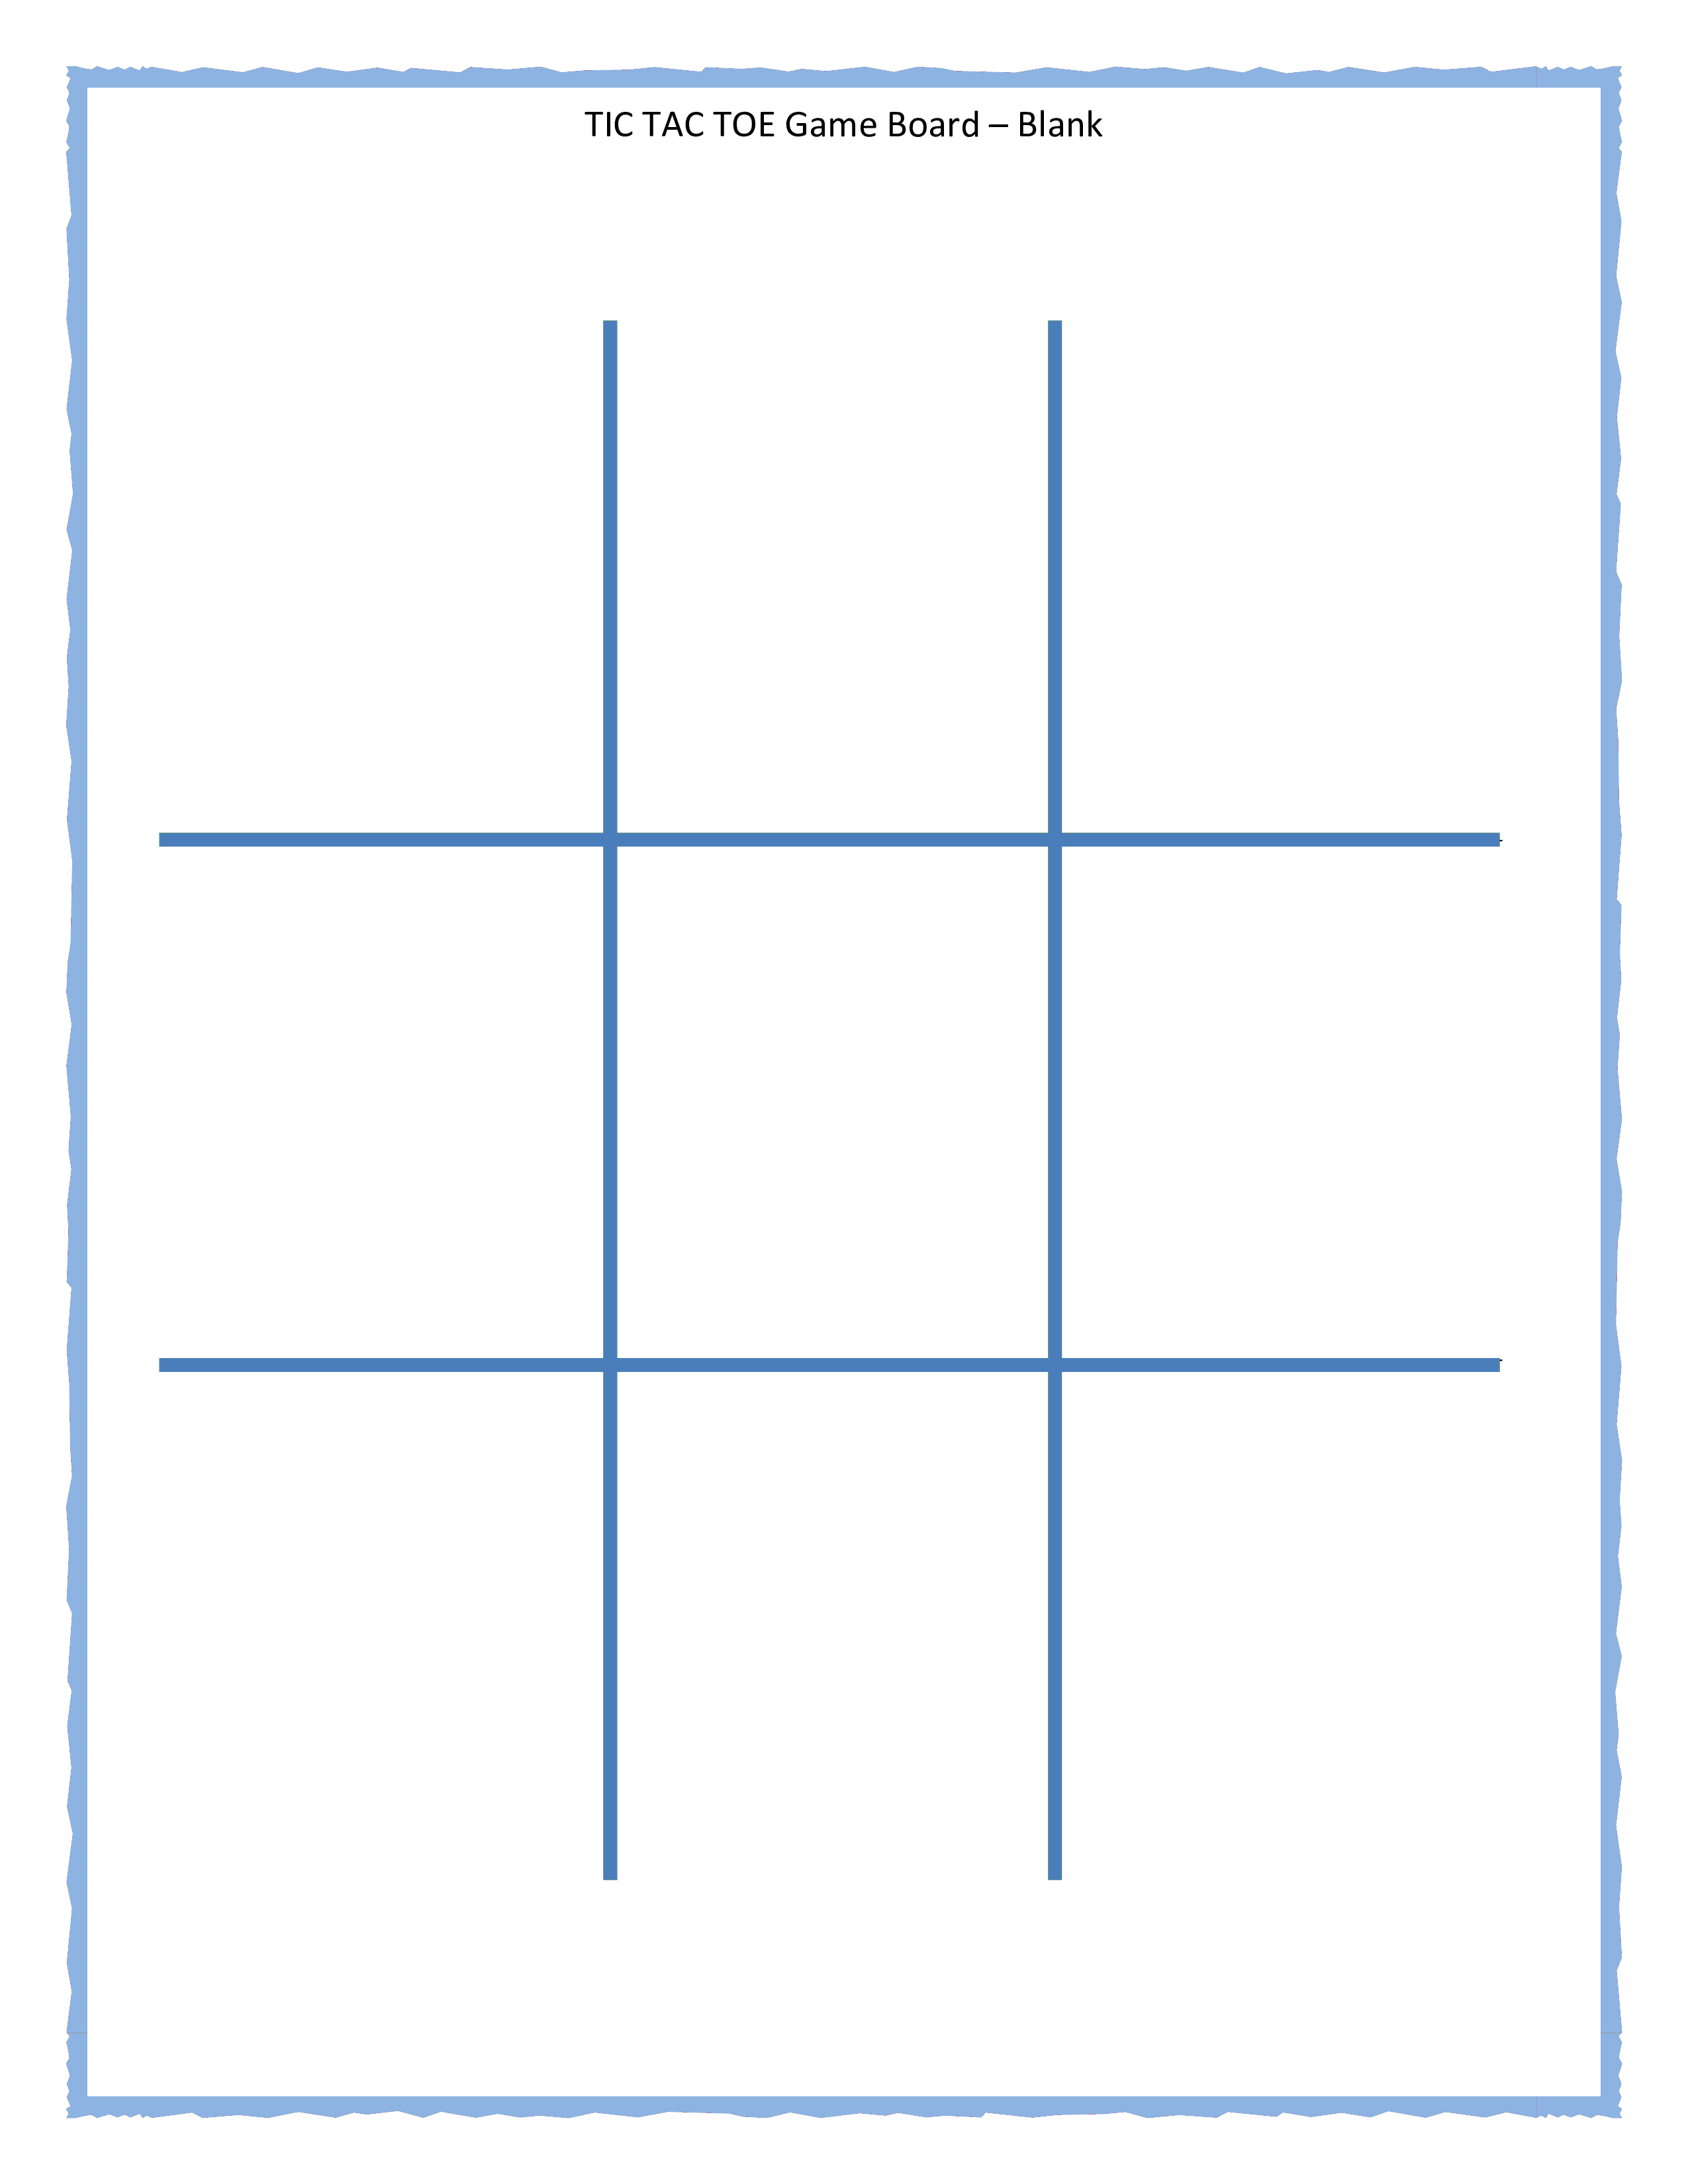 Tic Tac Game Board  Templates at allbusinesstemplates.com Pertaining To Tic Tac Toe Template Word